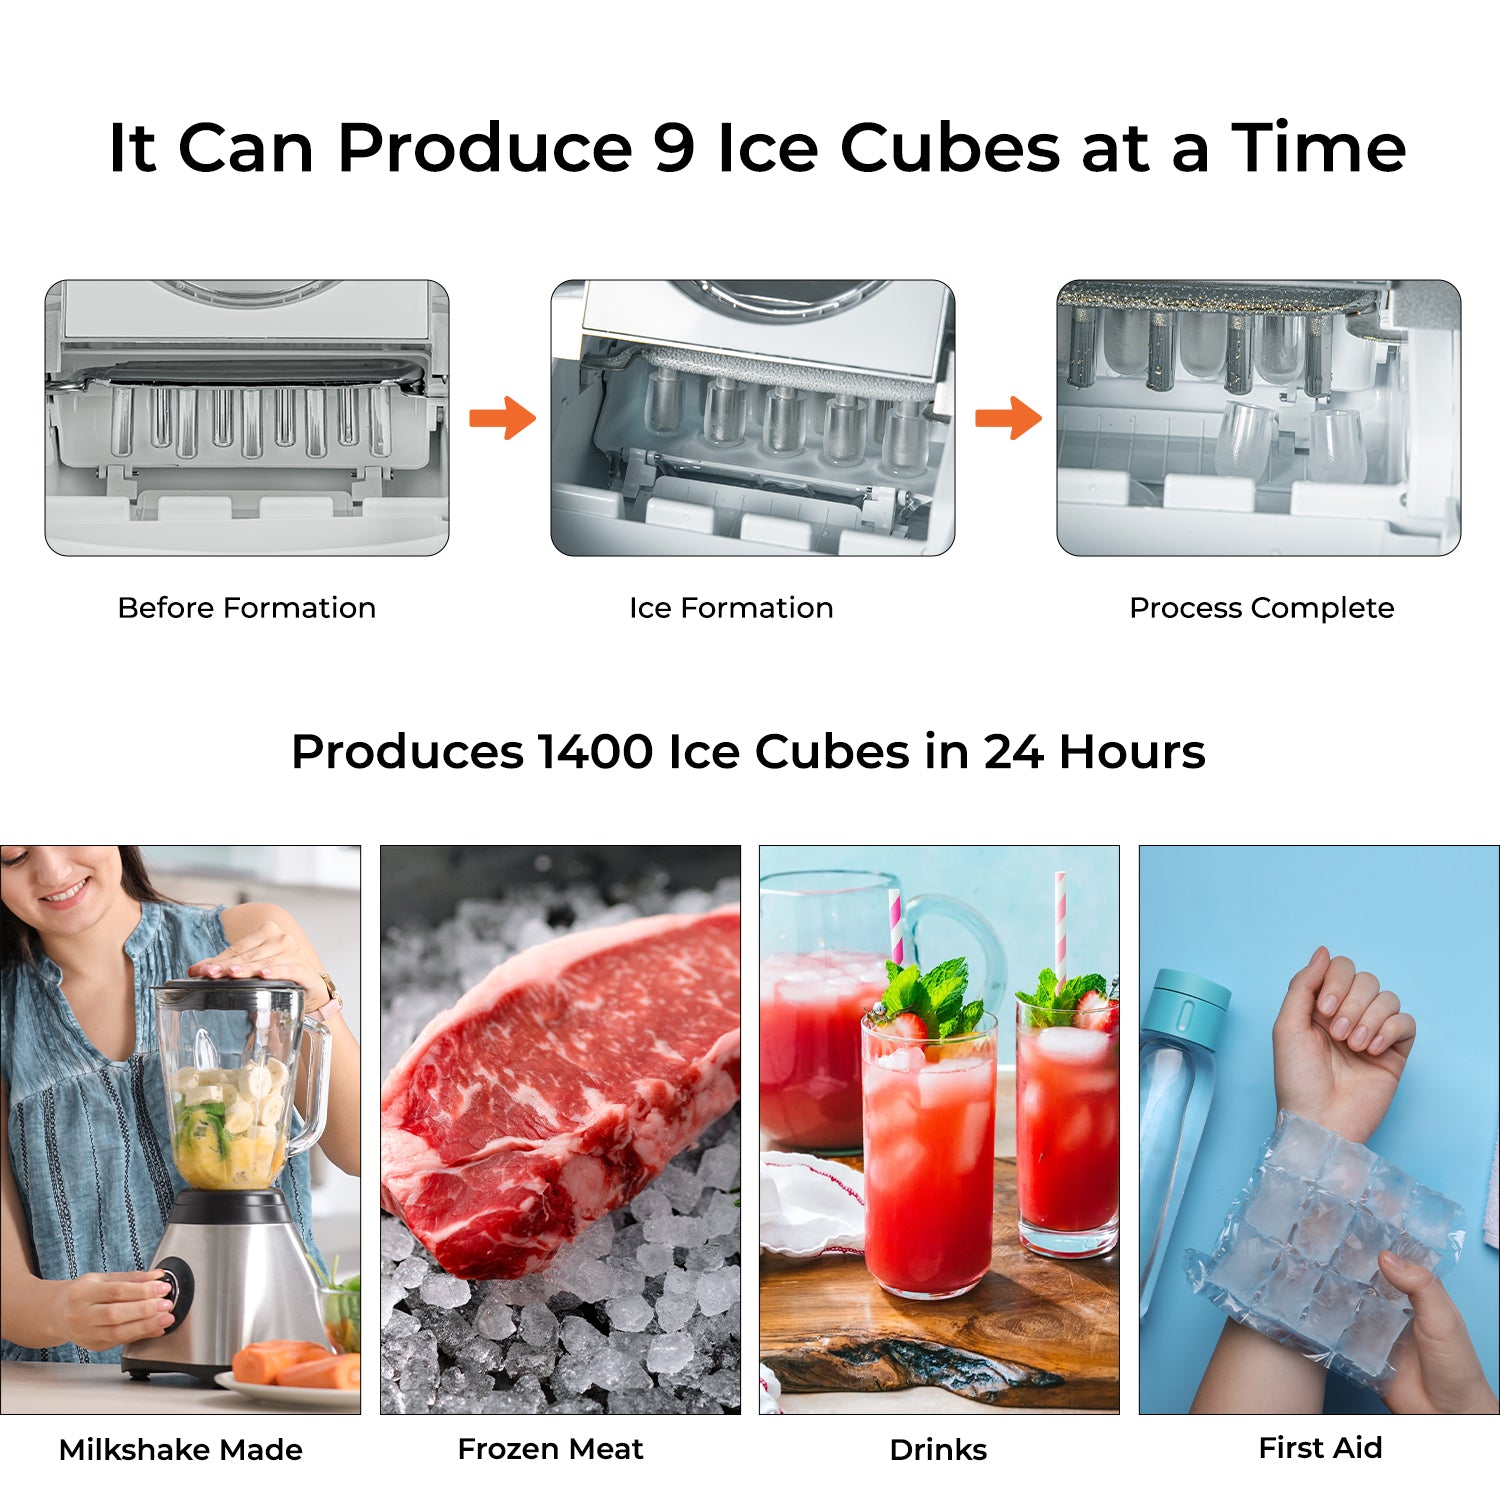 This image shows off what the process of creating the ice cubes looks like inside of the machine, there are 9 freezing sticks that turn the water from the machine into ice cubes, showing the production rate at 1400 ice cubes in 24 hours.